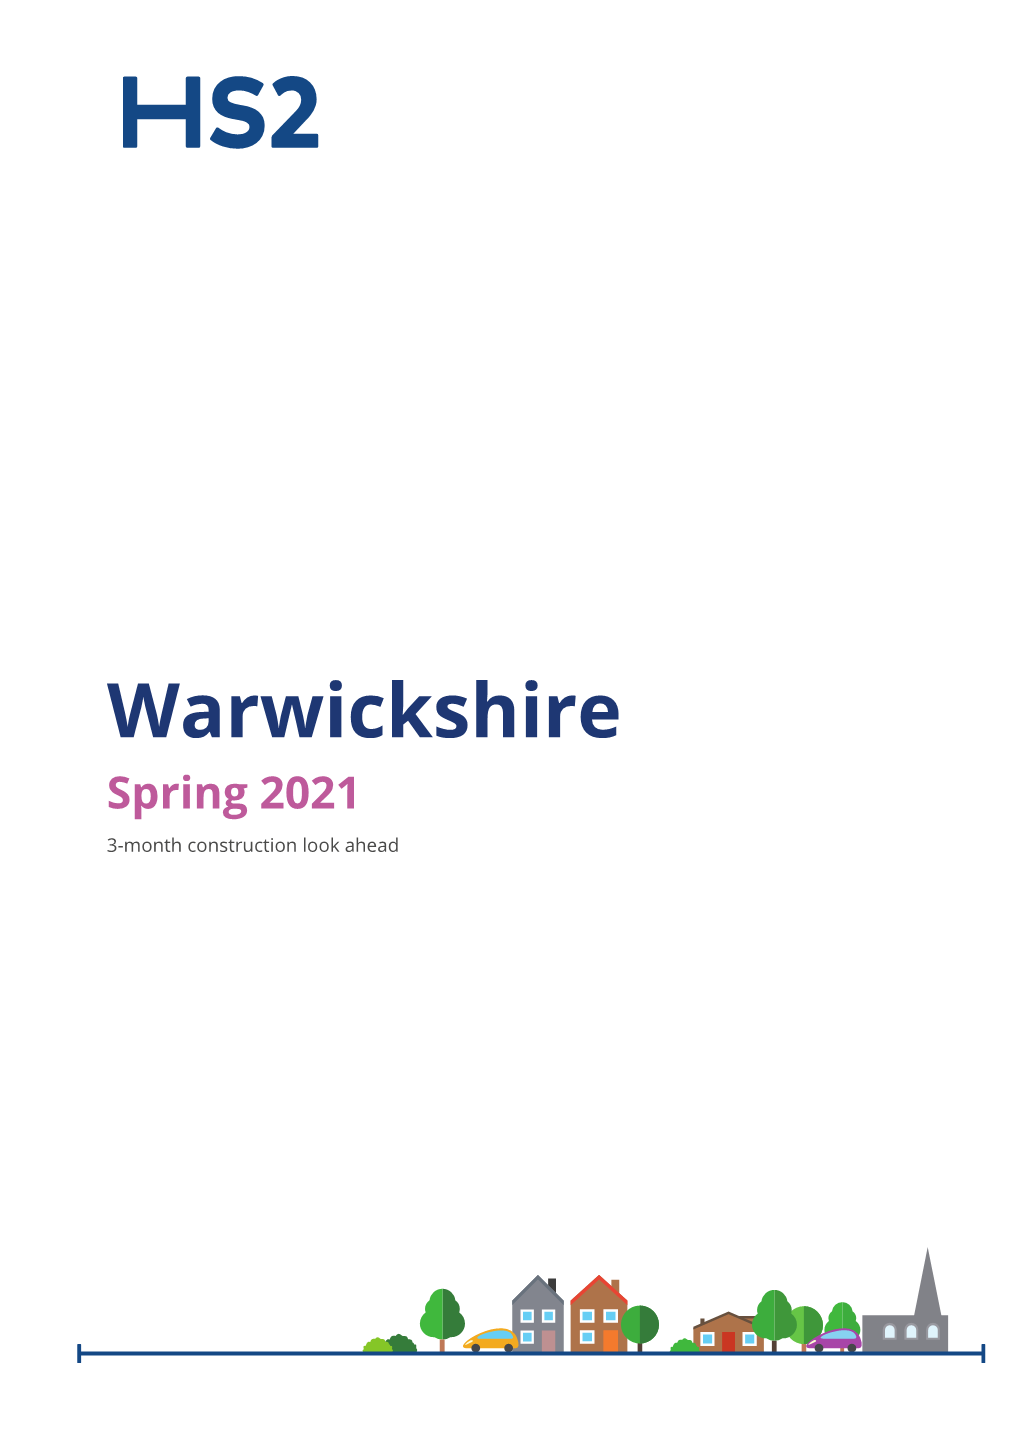 Warwickshire Spring 2021 3-Month Construction Look Ahead